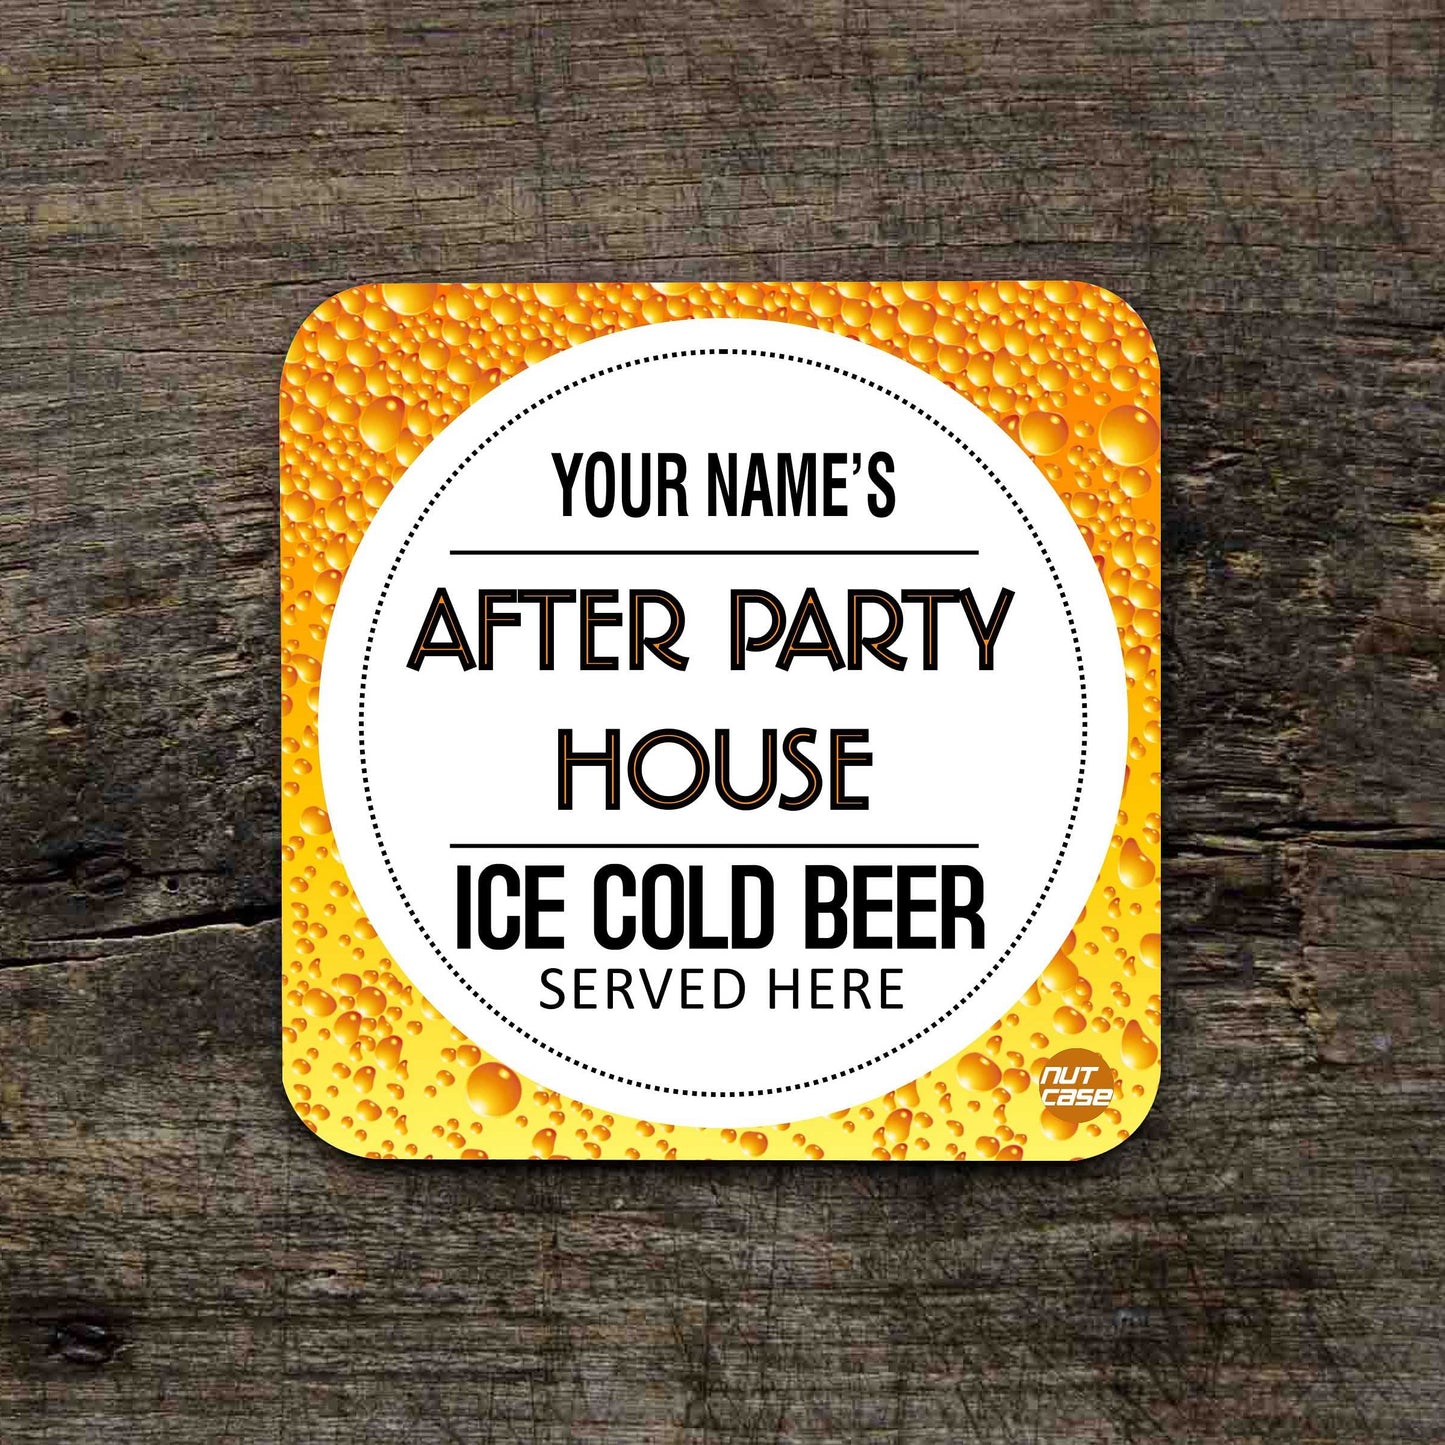 Personalized Bar Coasters With Name Set of 2 - Ice Cold Beer Nutcase